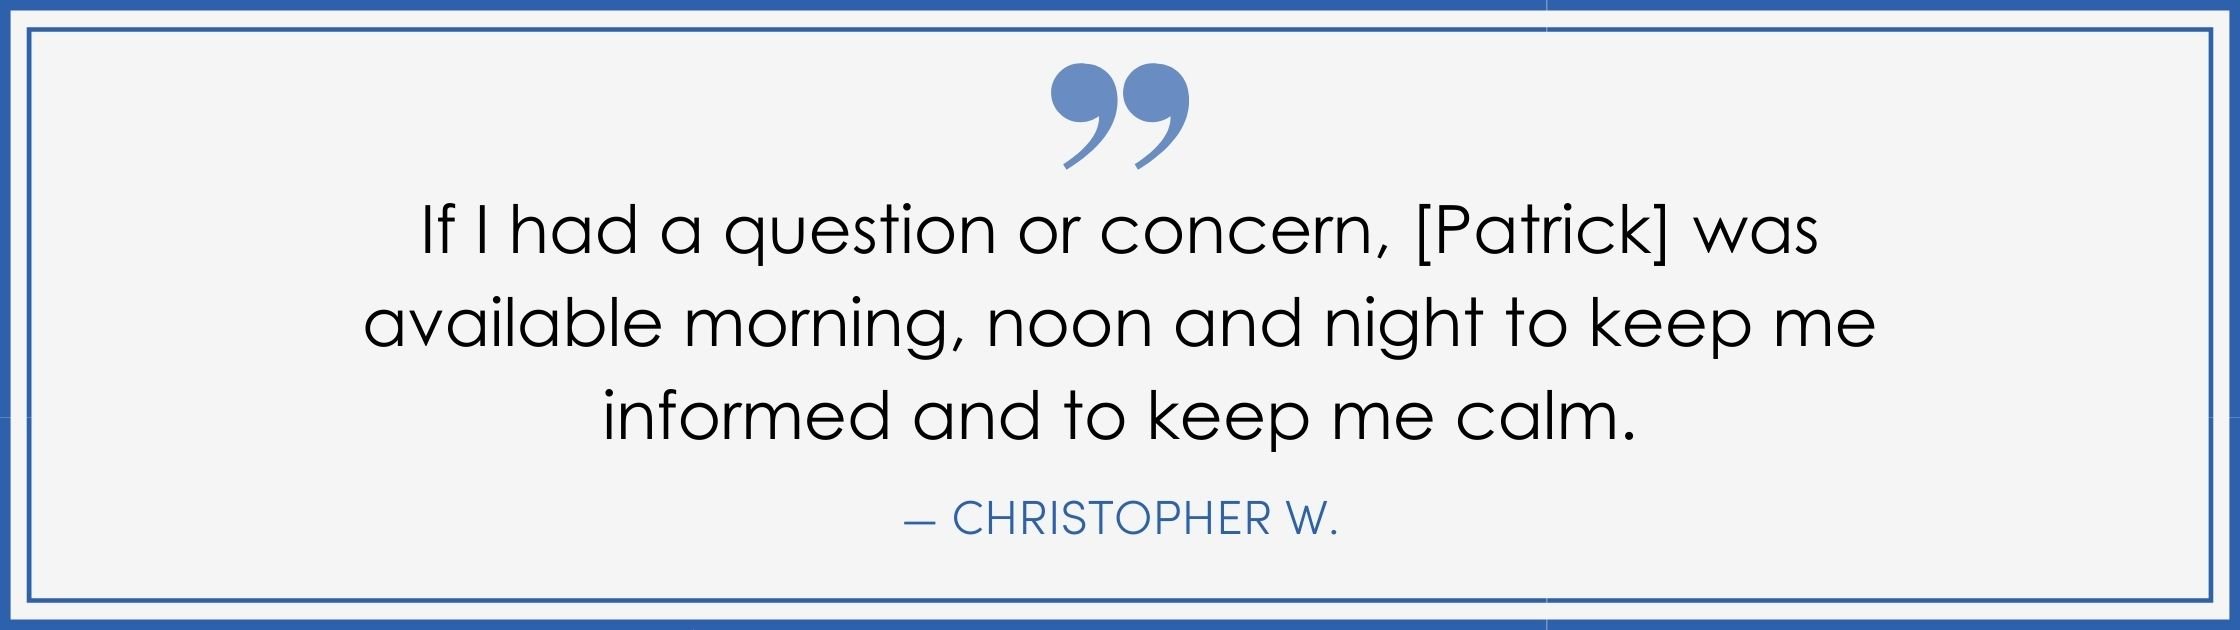 “If I had a question or concern, [Patrick] was available morning, noon, and night to keep me informed and to keep me calm. –Christopher W. (Copy) (Copy)